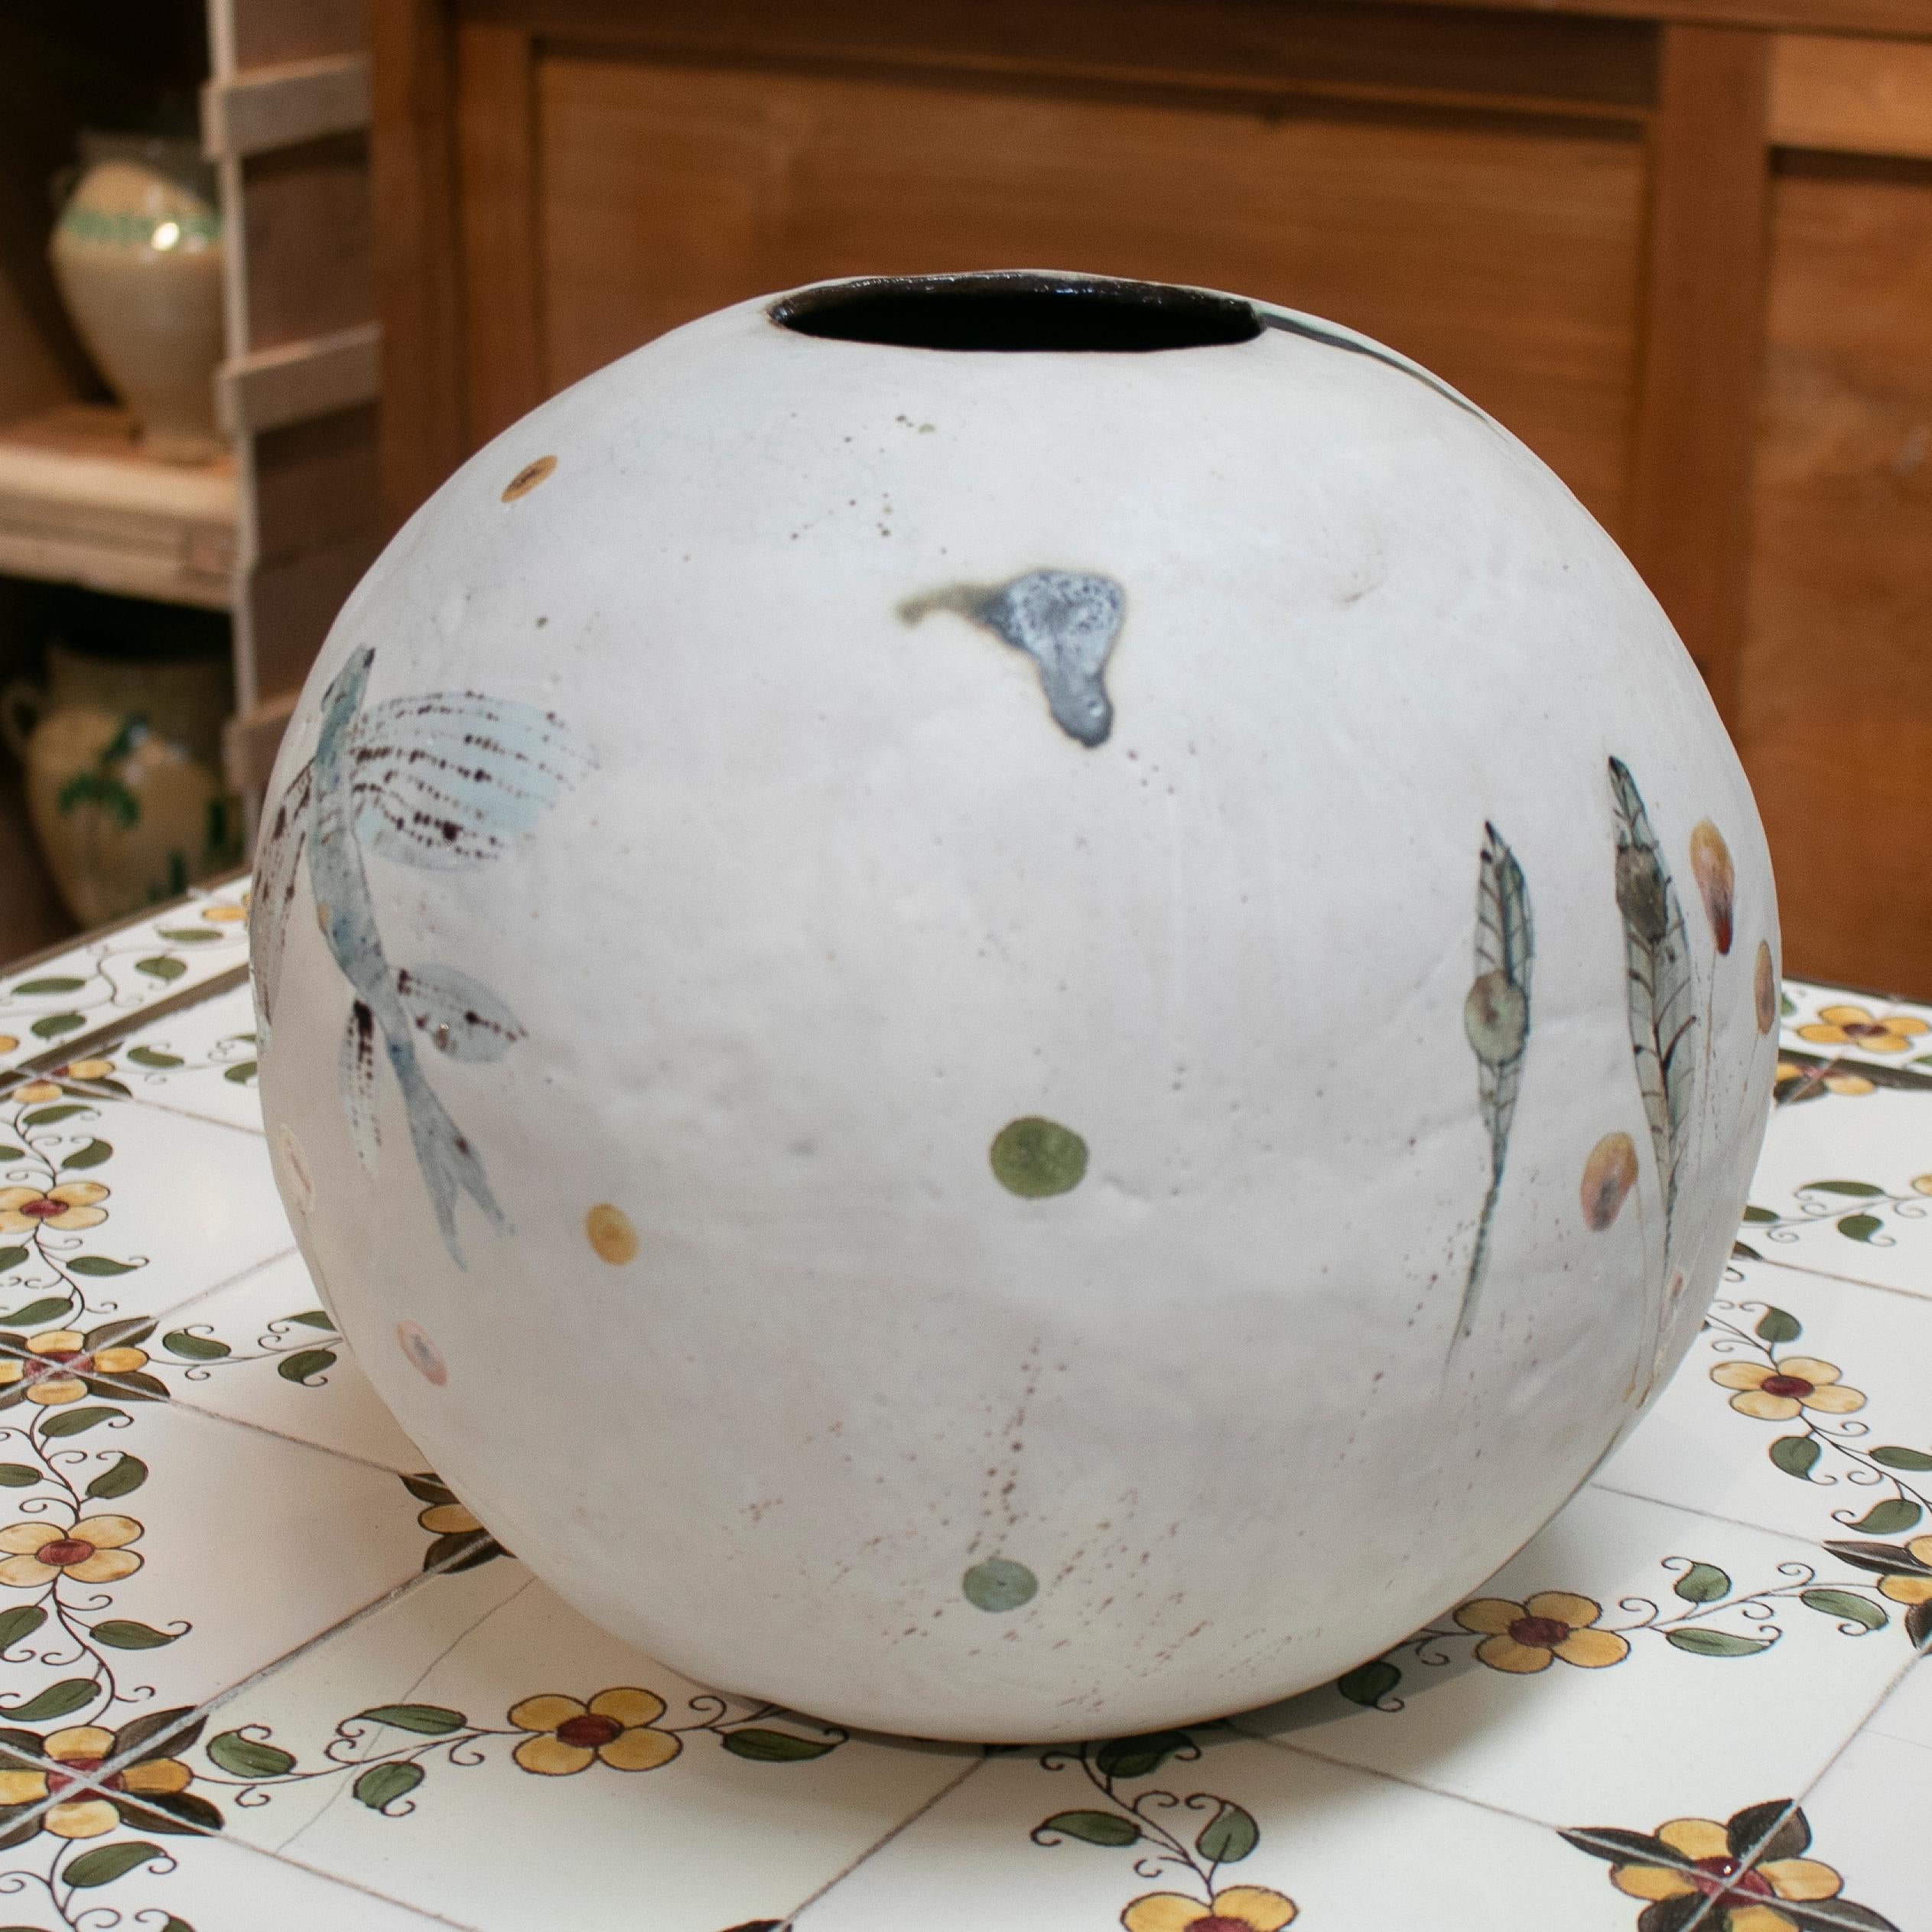 Contemporary Original Handmade Ceramic Vase Decorated with Hand Painted Fish and Plants